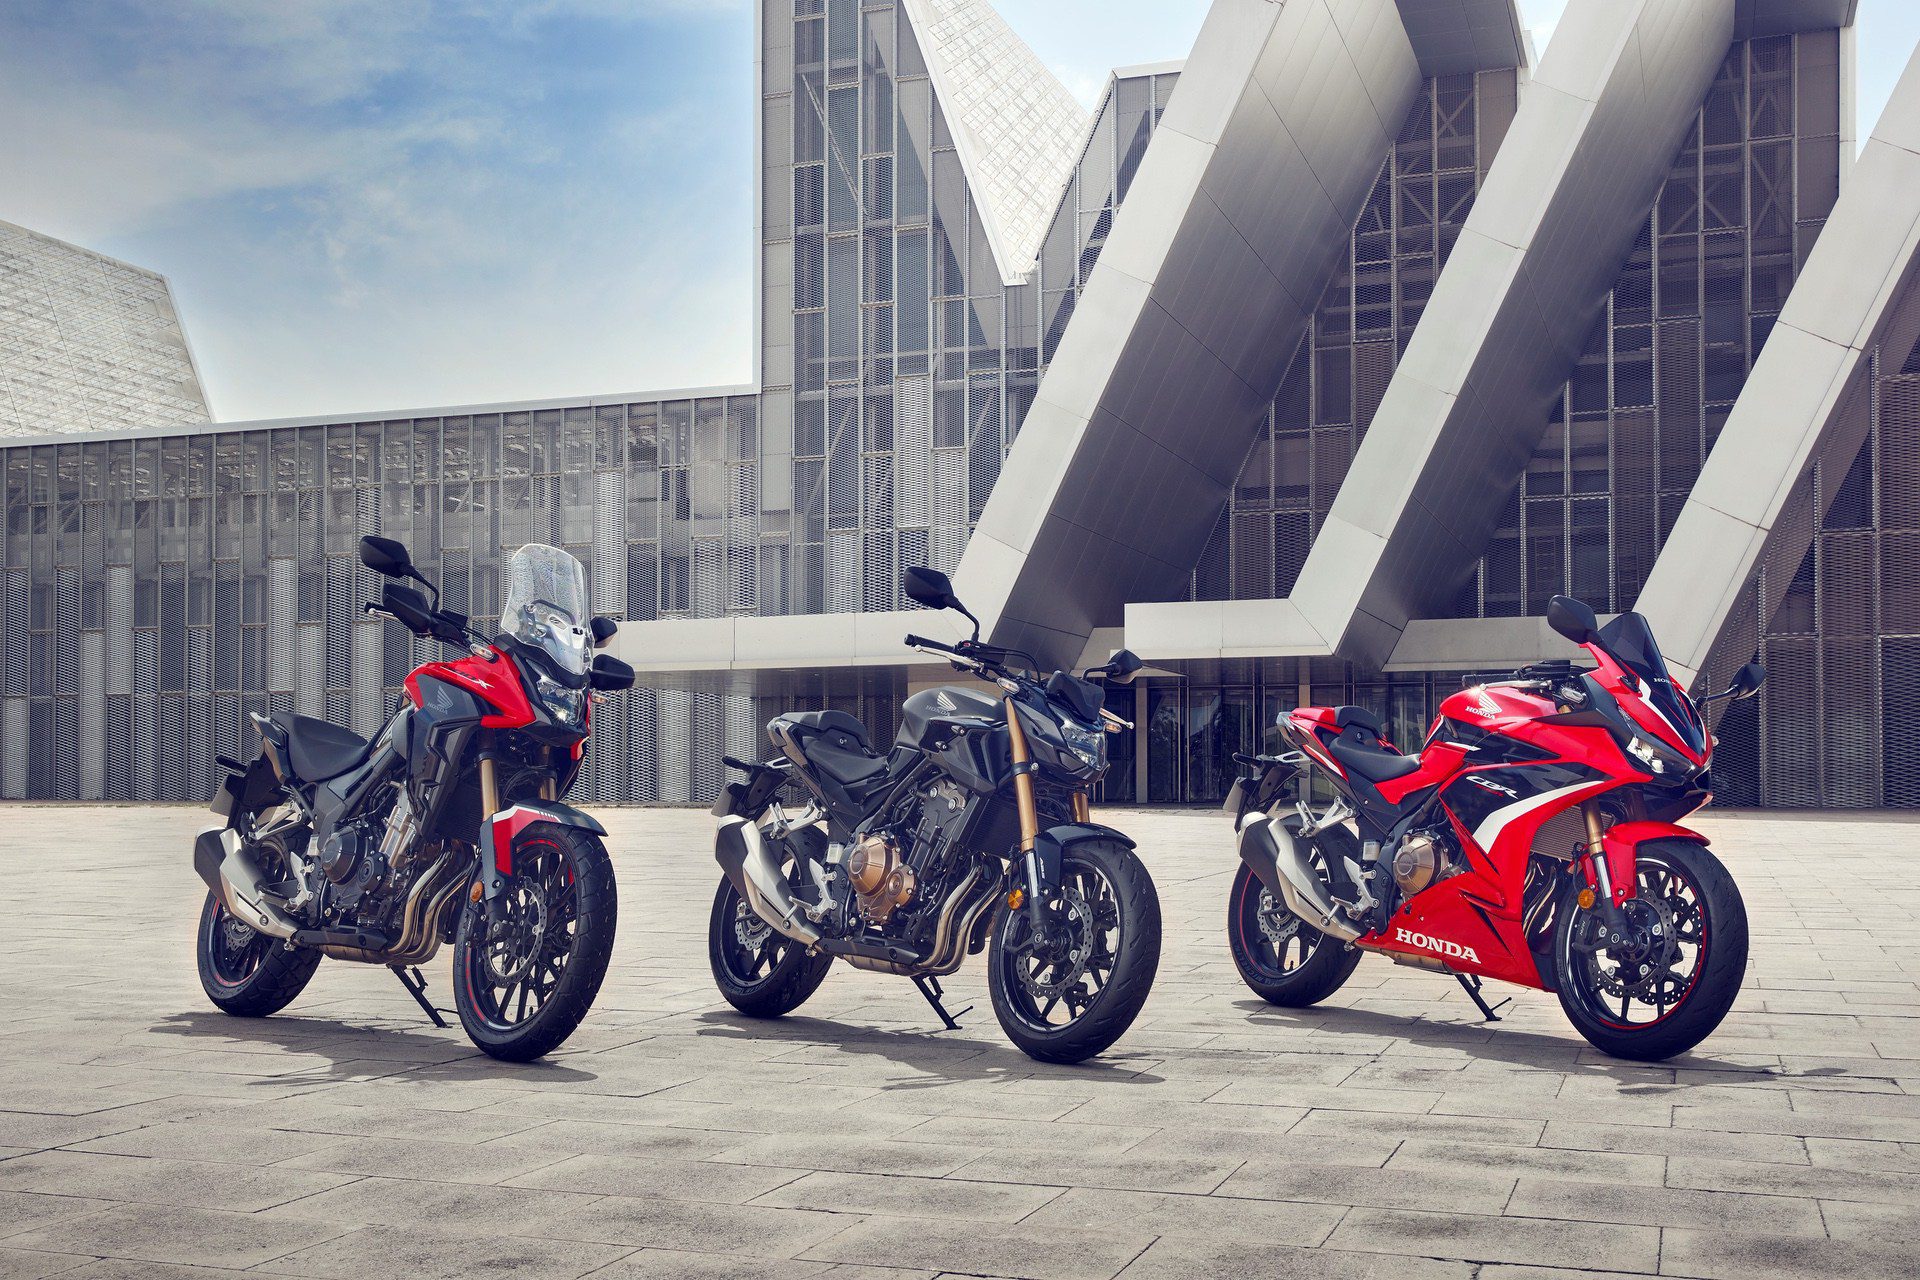 Honda CBR500R and CB500X and CB500F parked in front of building